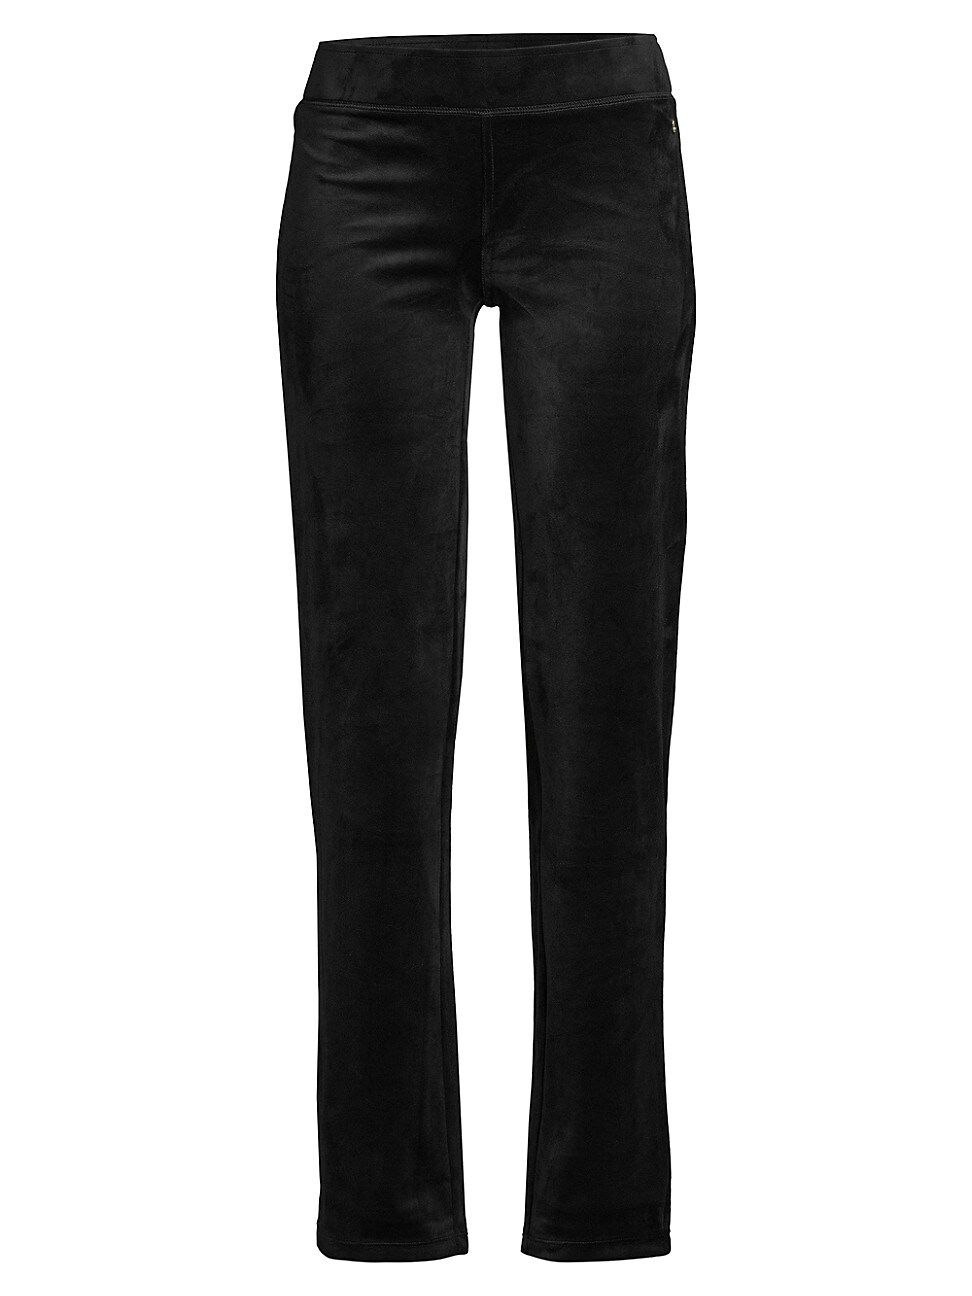 Lilly Pulitzer Women's Dorsey Velour Pants - Onyx - Size Small | Saks Fifth Avenue